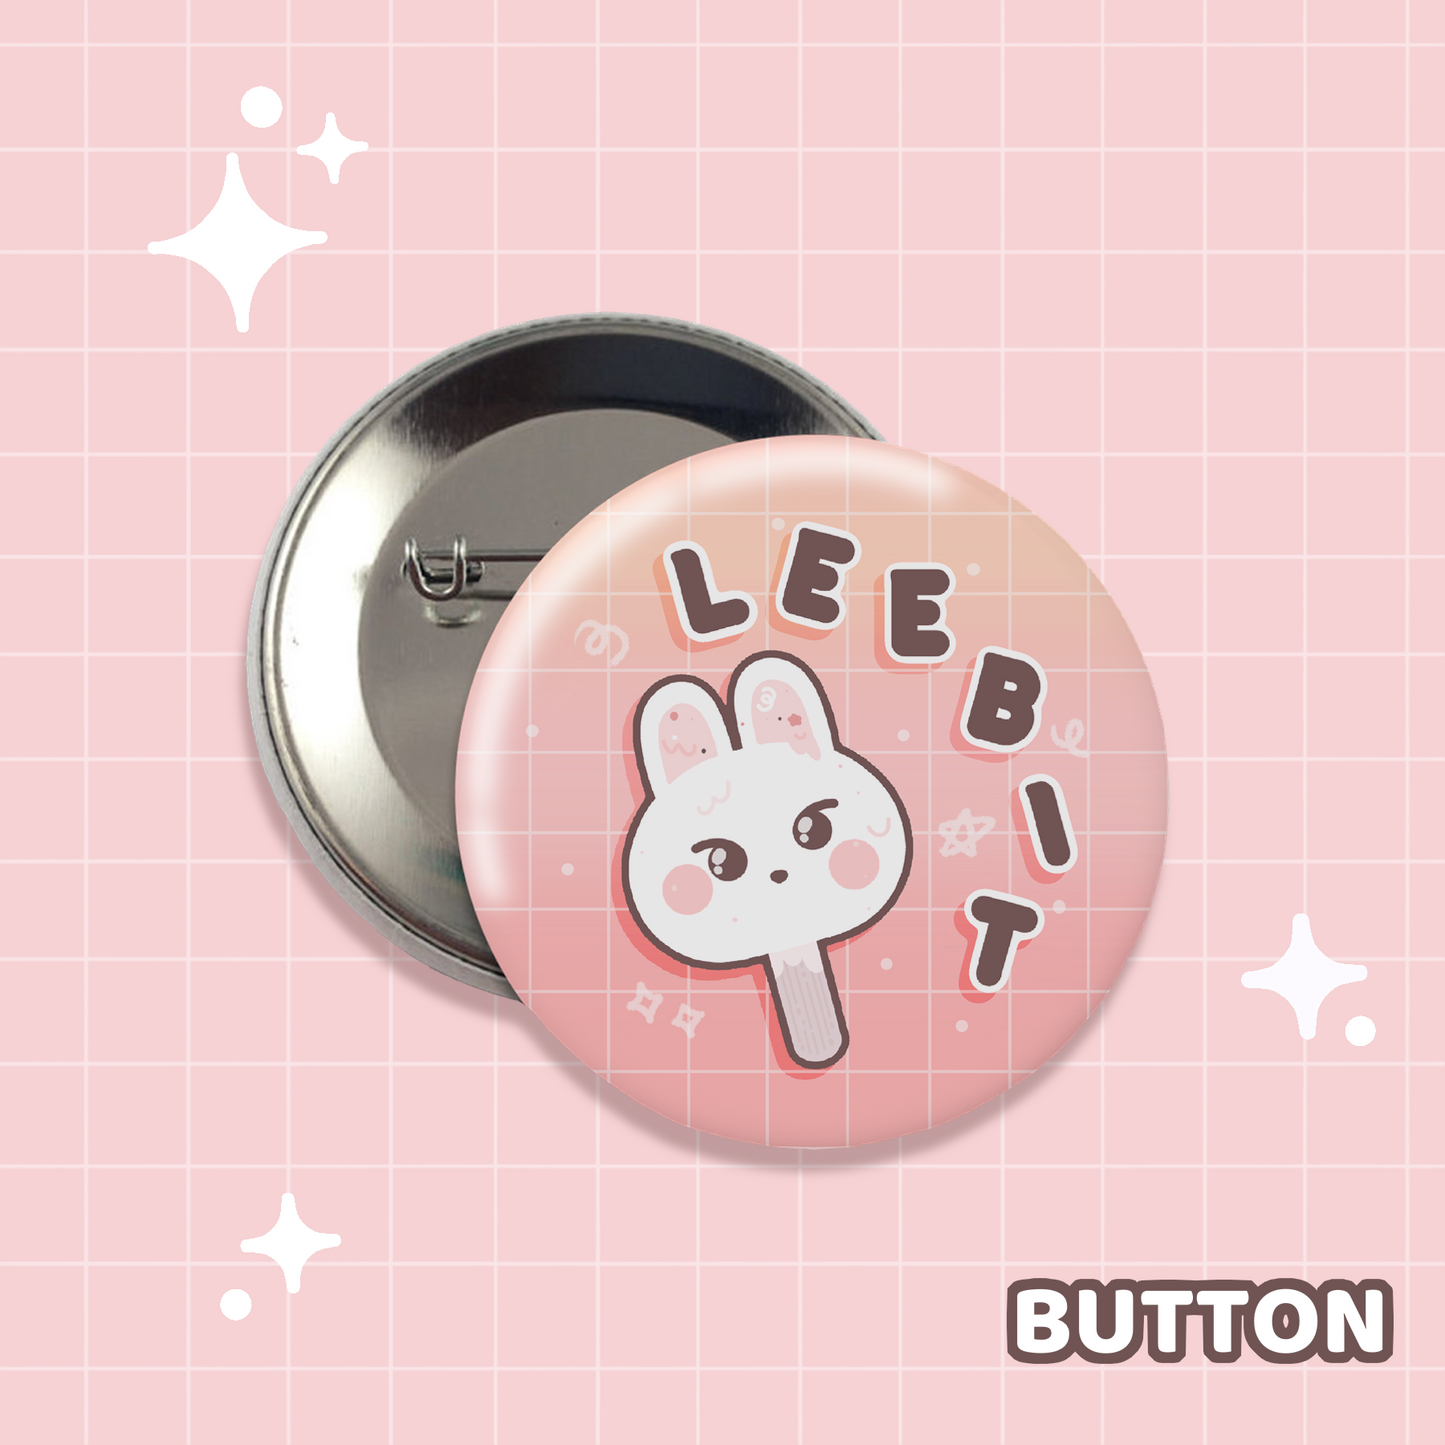 Leebits of Sprinkles Button